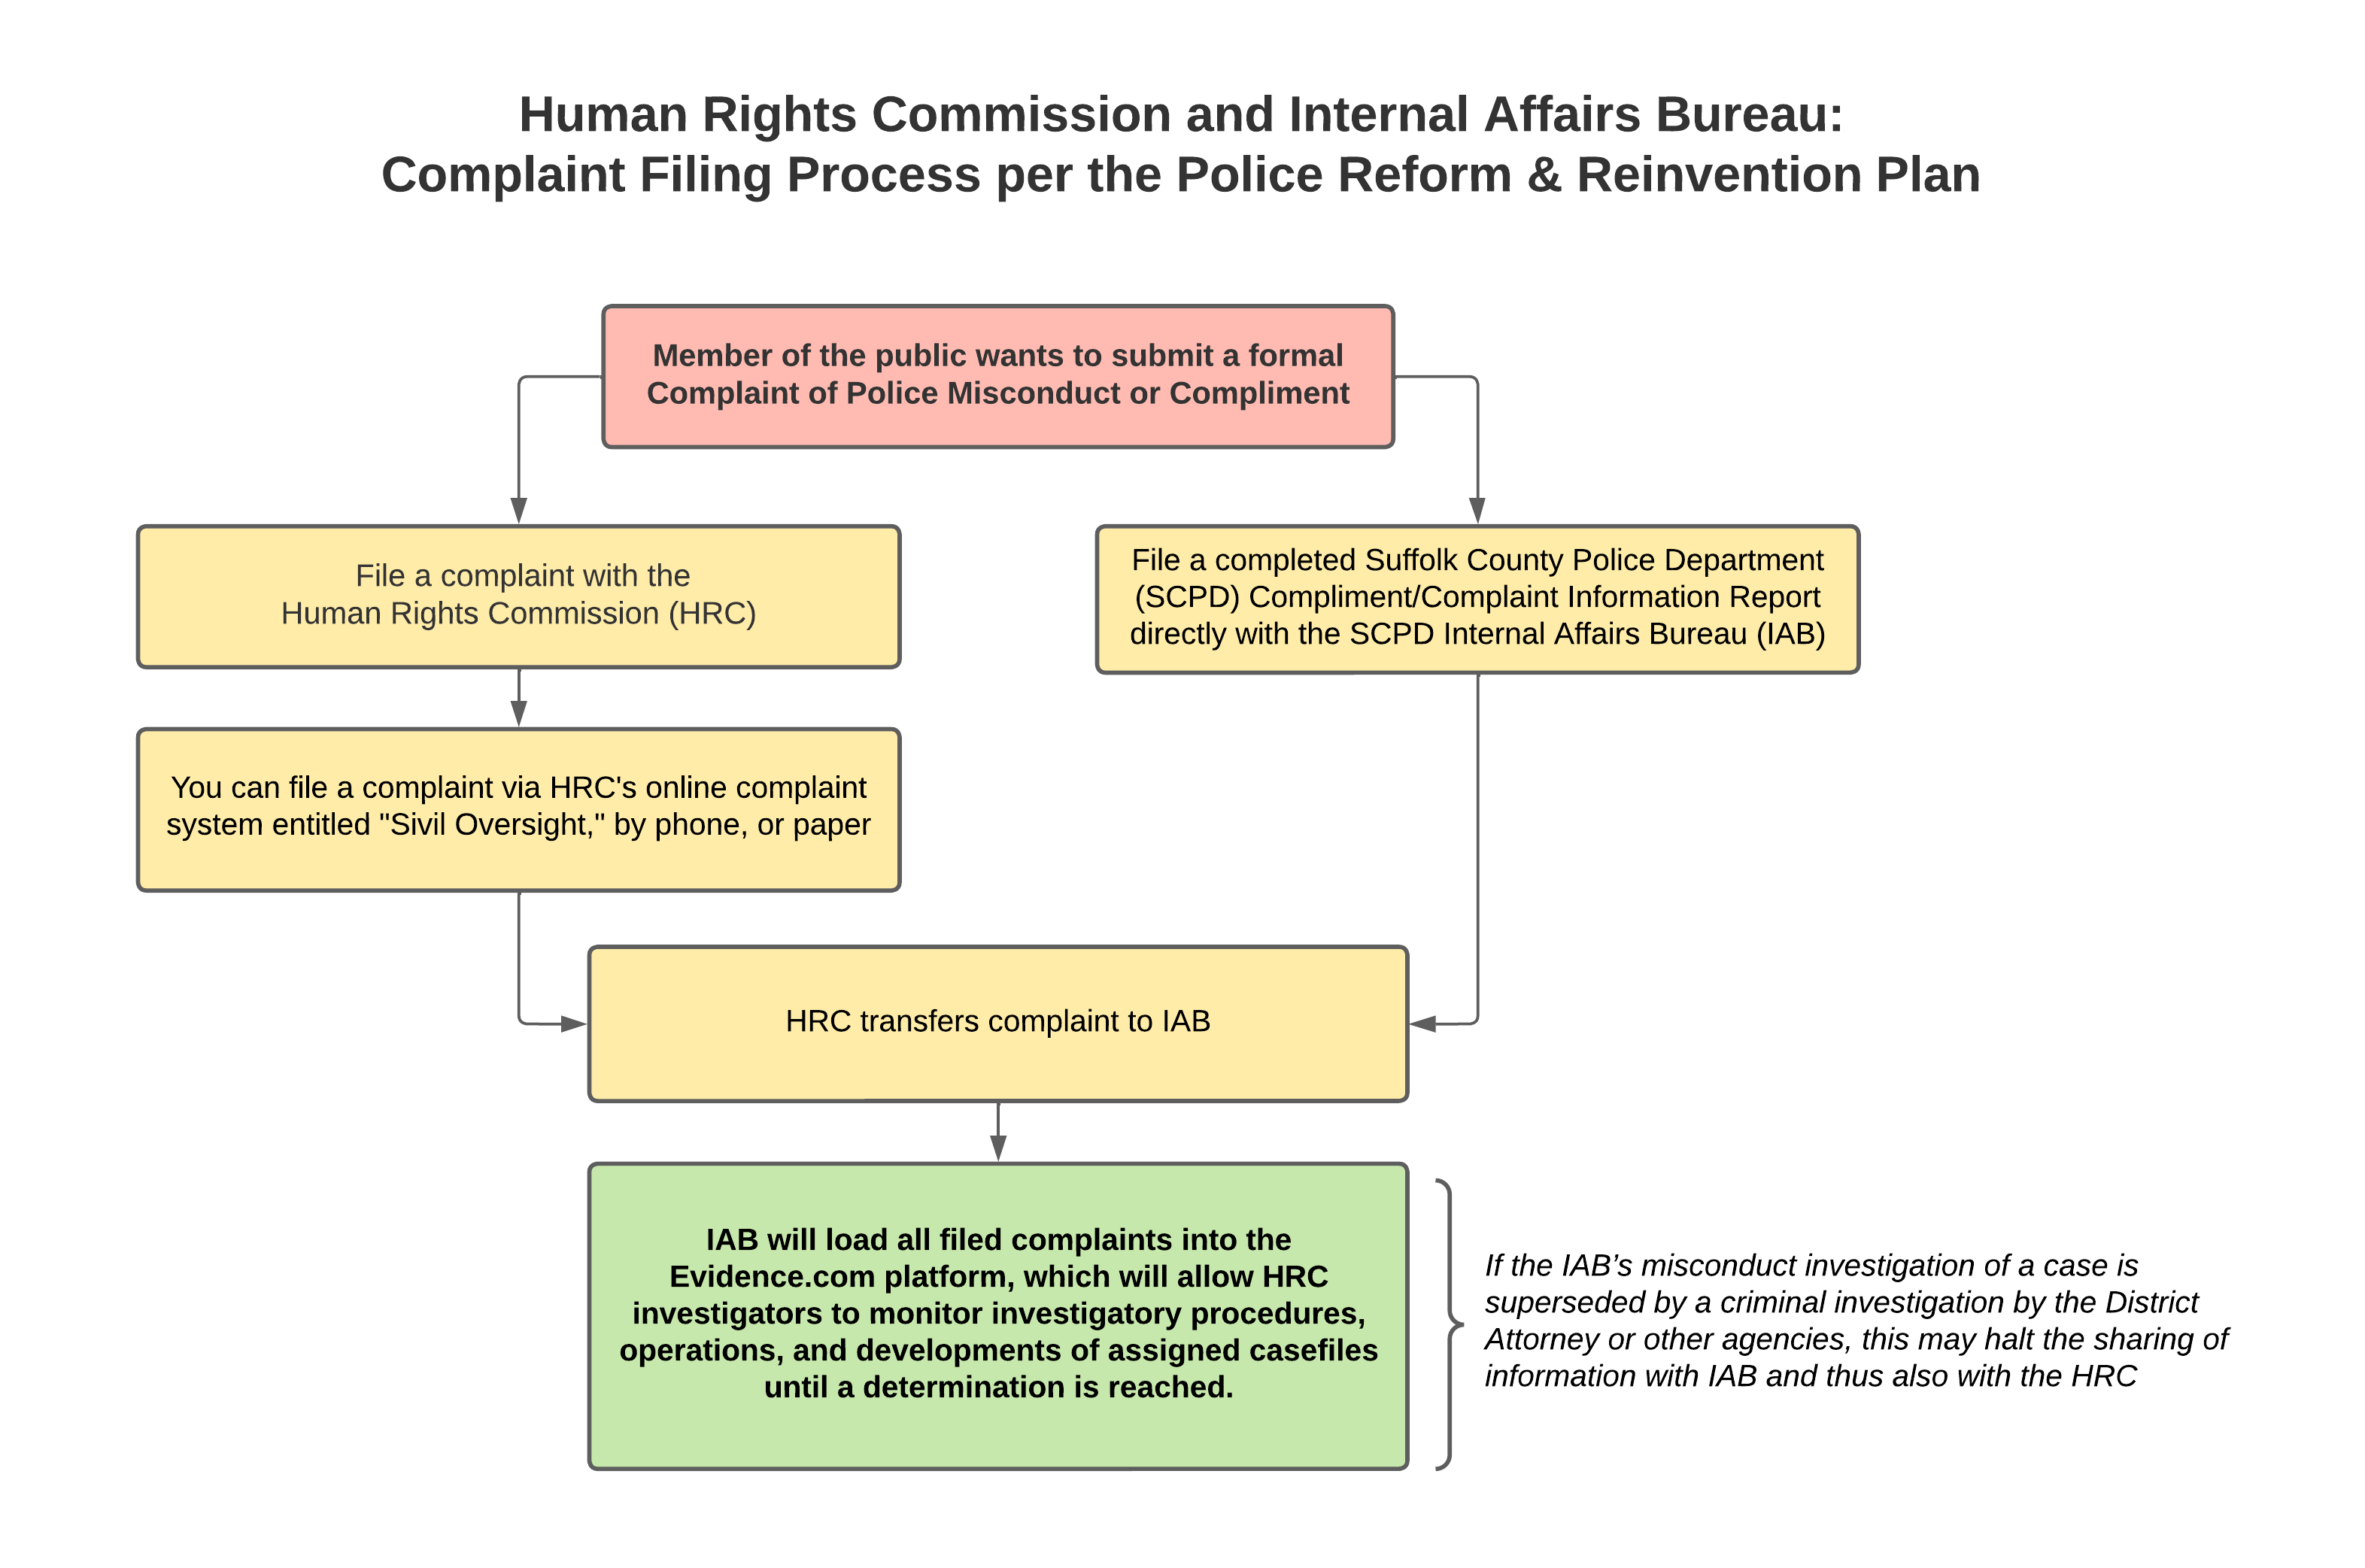 complaint filing process per police reform and reinvention